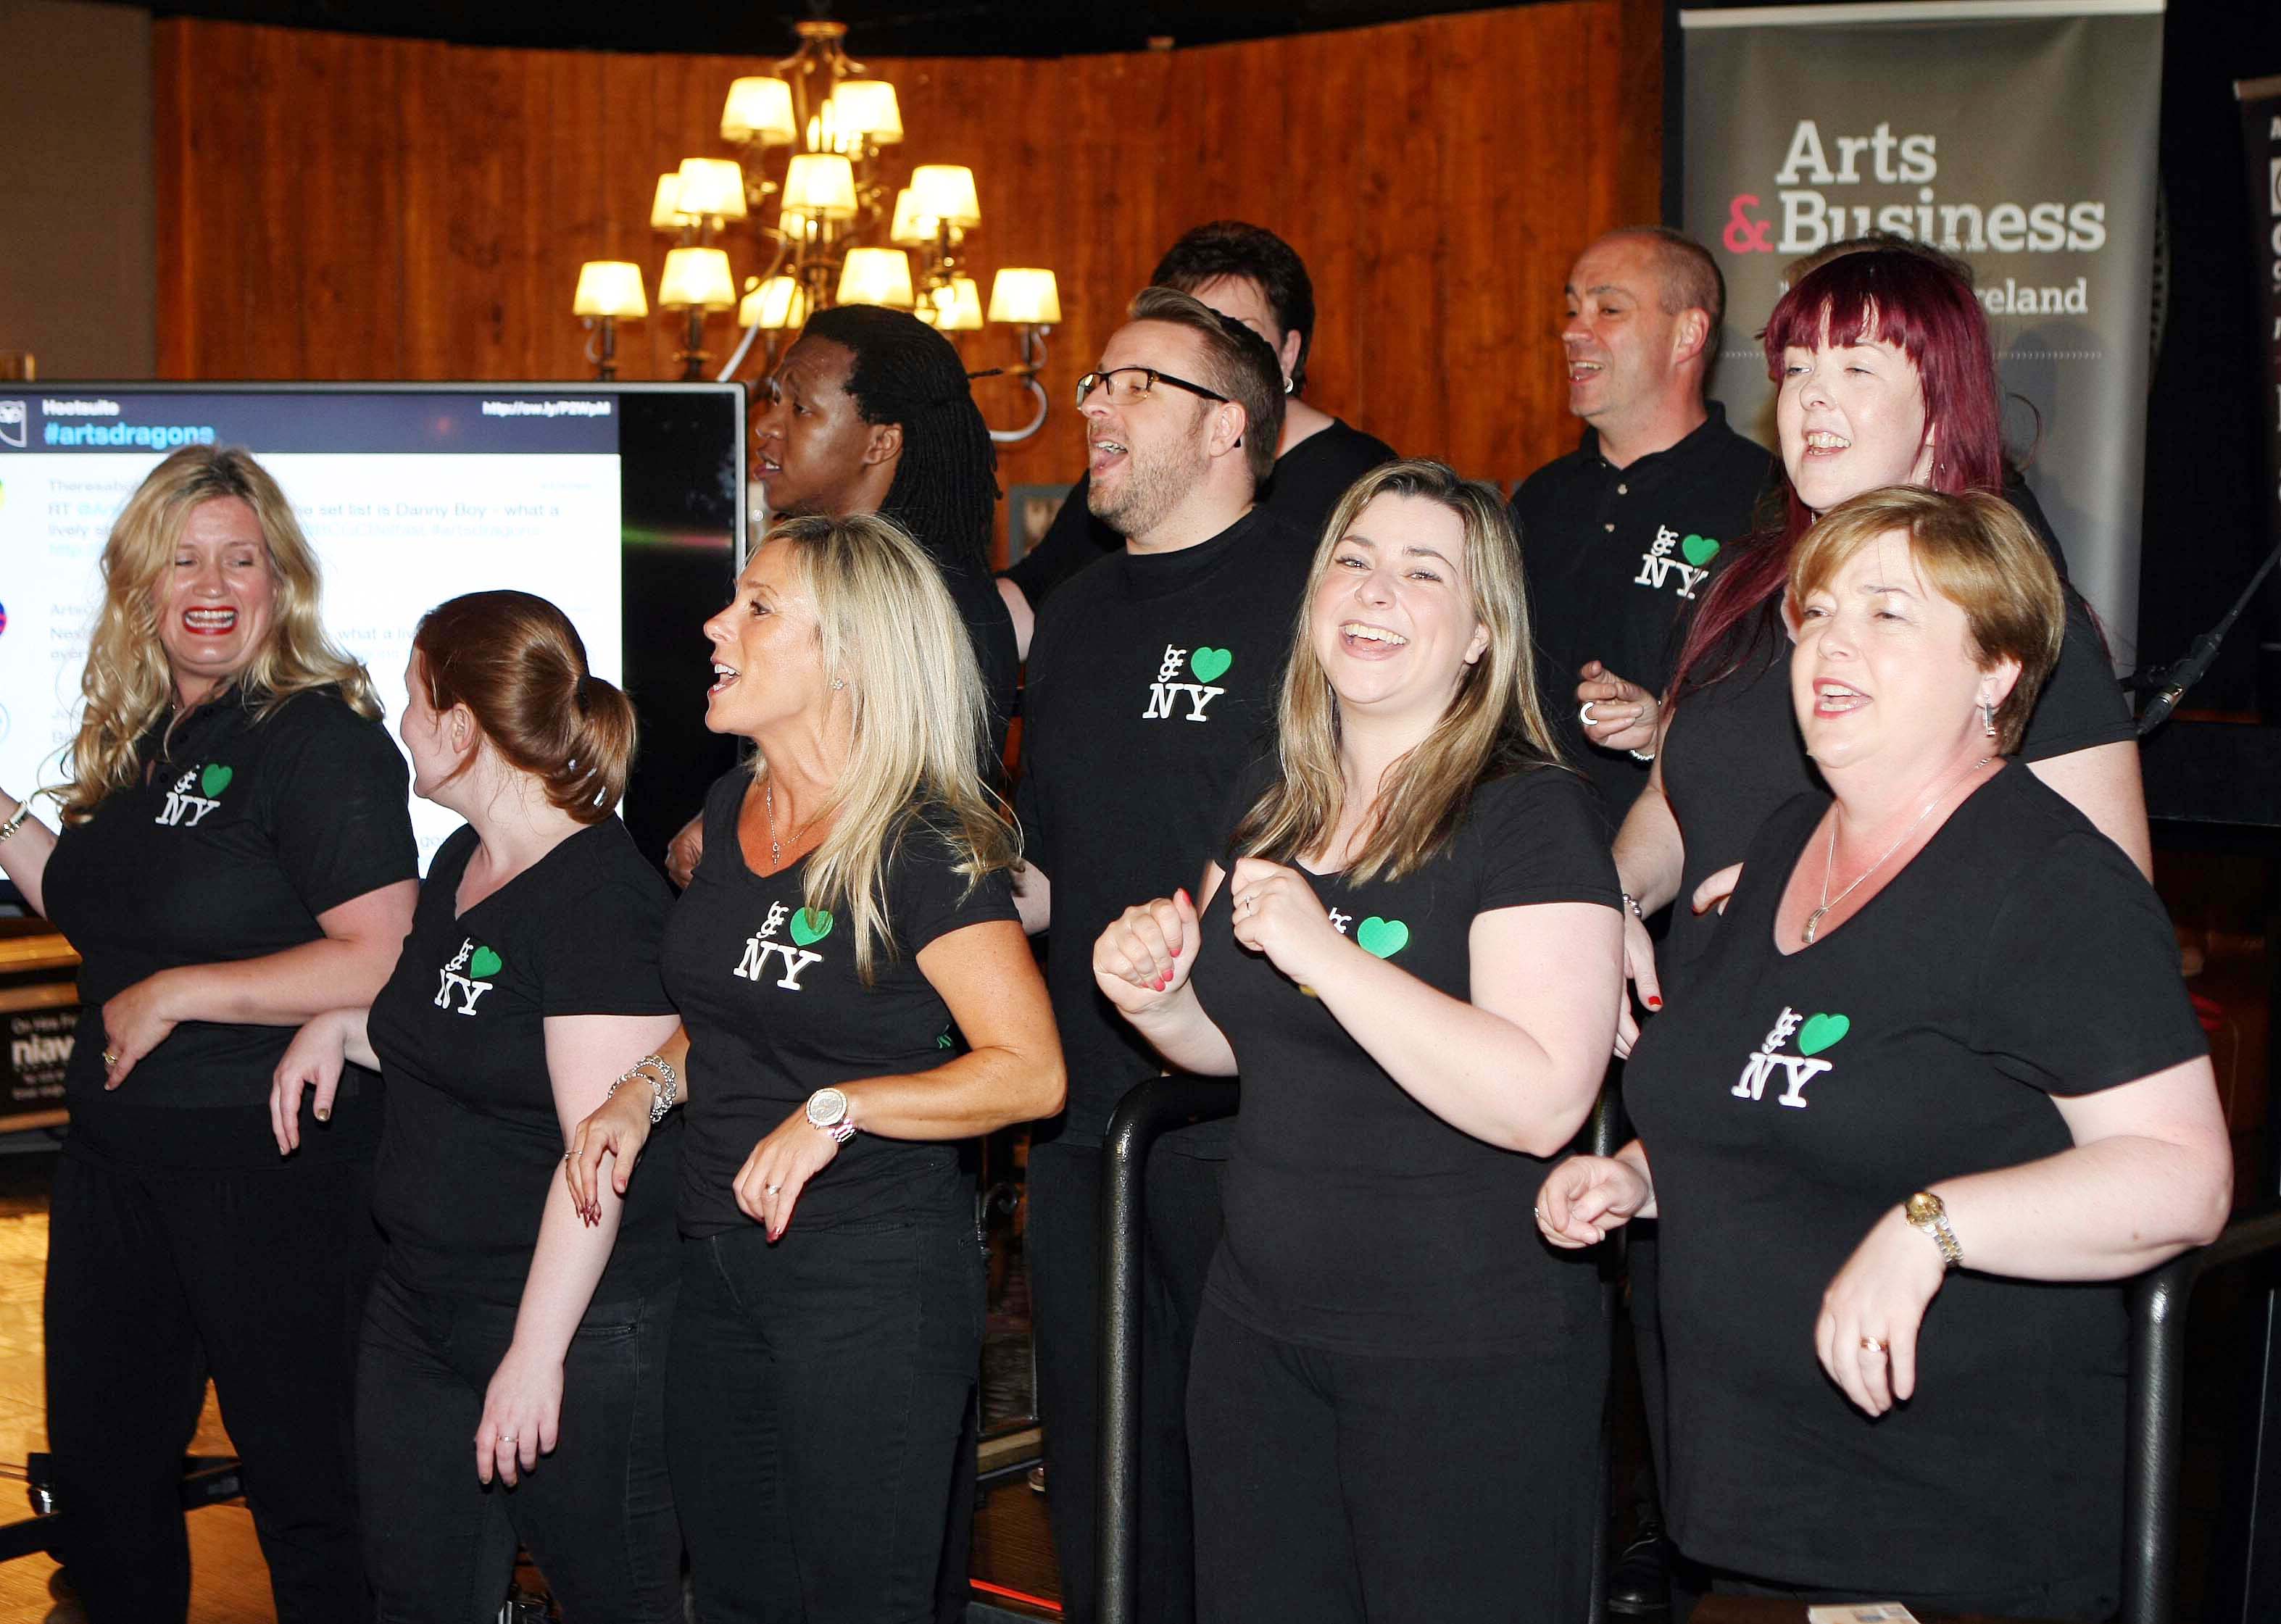 The Belfast Community Gospel Choir performing at the Arts Dragons even in Stix and Stones     Picture by Freddie Parkinson